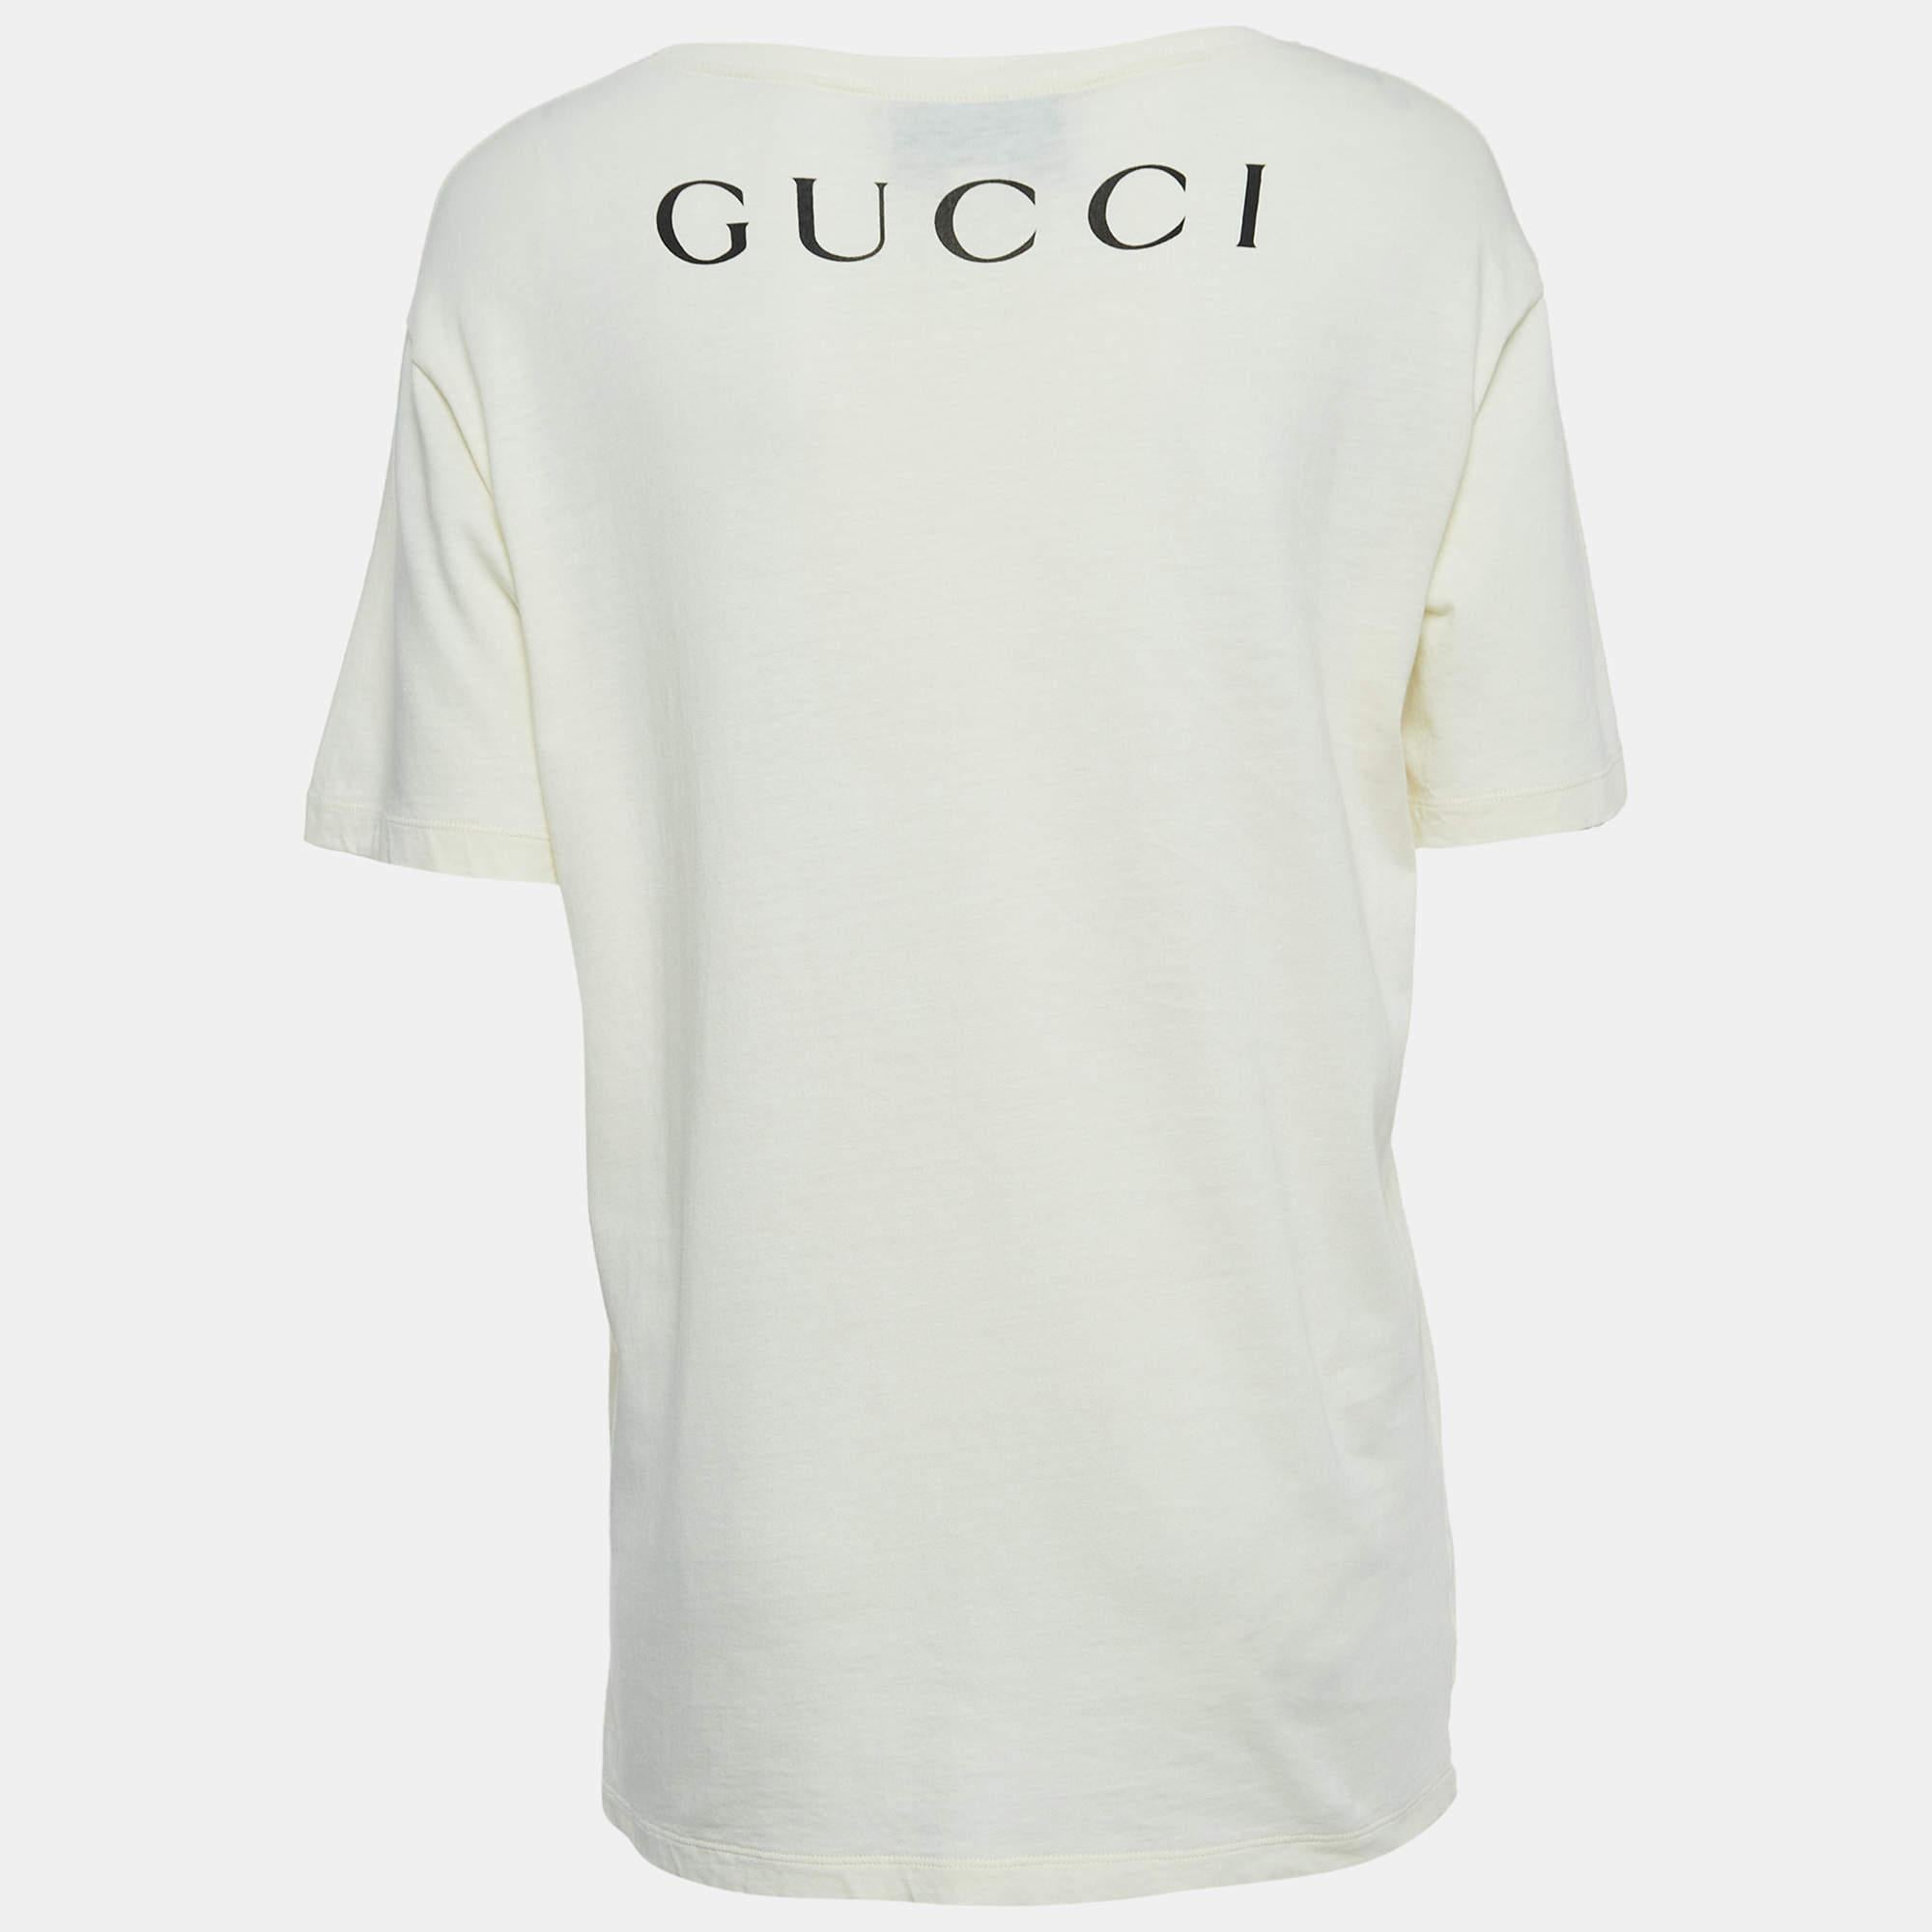 Perfect for casual outings or errands, this Gucci t-shirt is the best piece to feel comfortable and stylish in. It flaunts a catchy shade and a relaxed fit.

